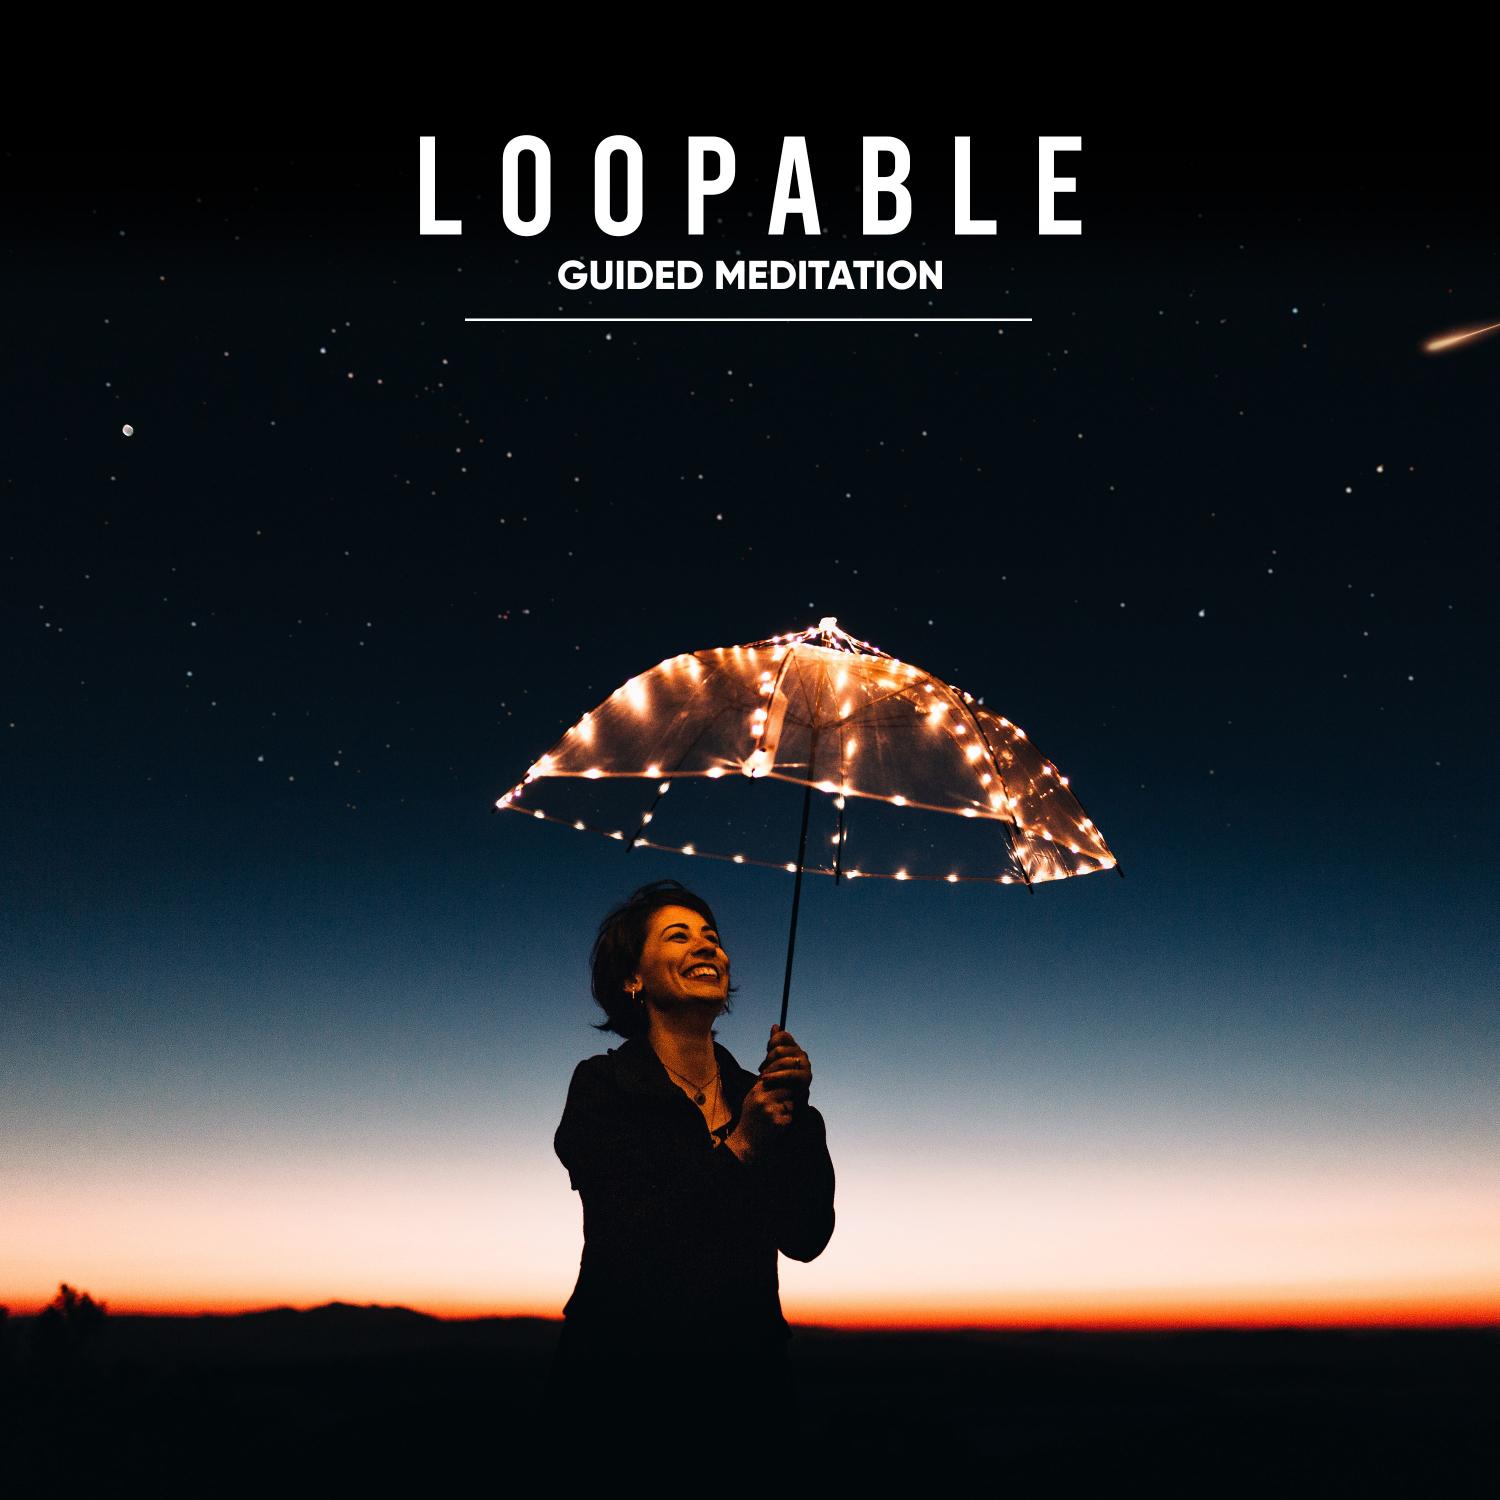 21 Loopable Ambience Songs for Guided Meditation